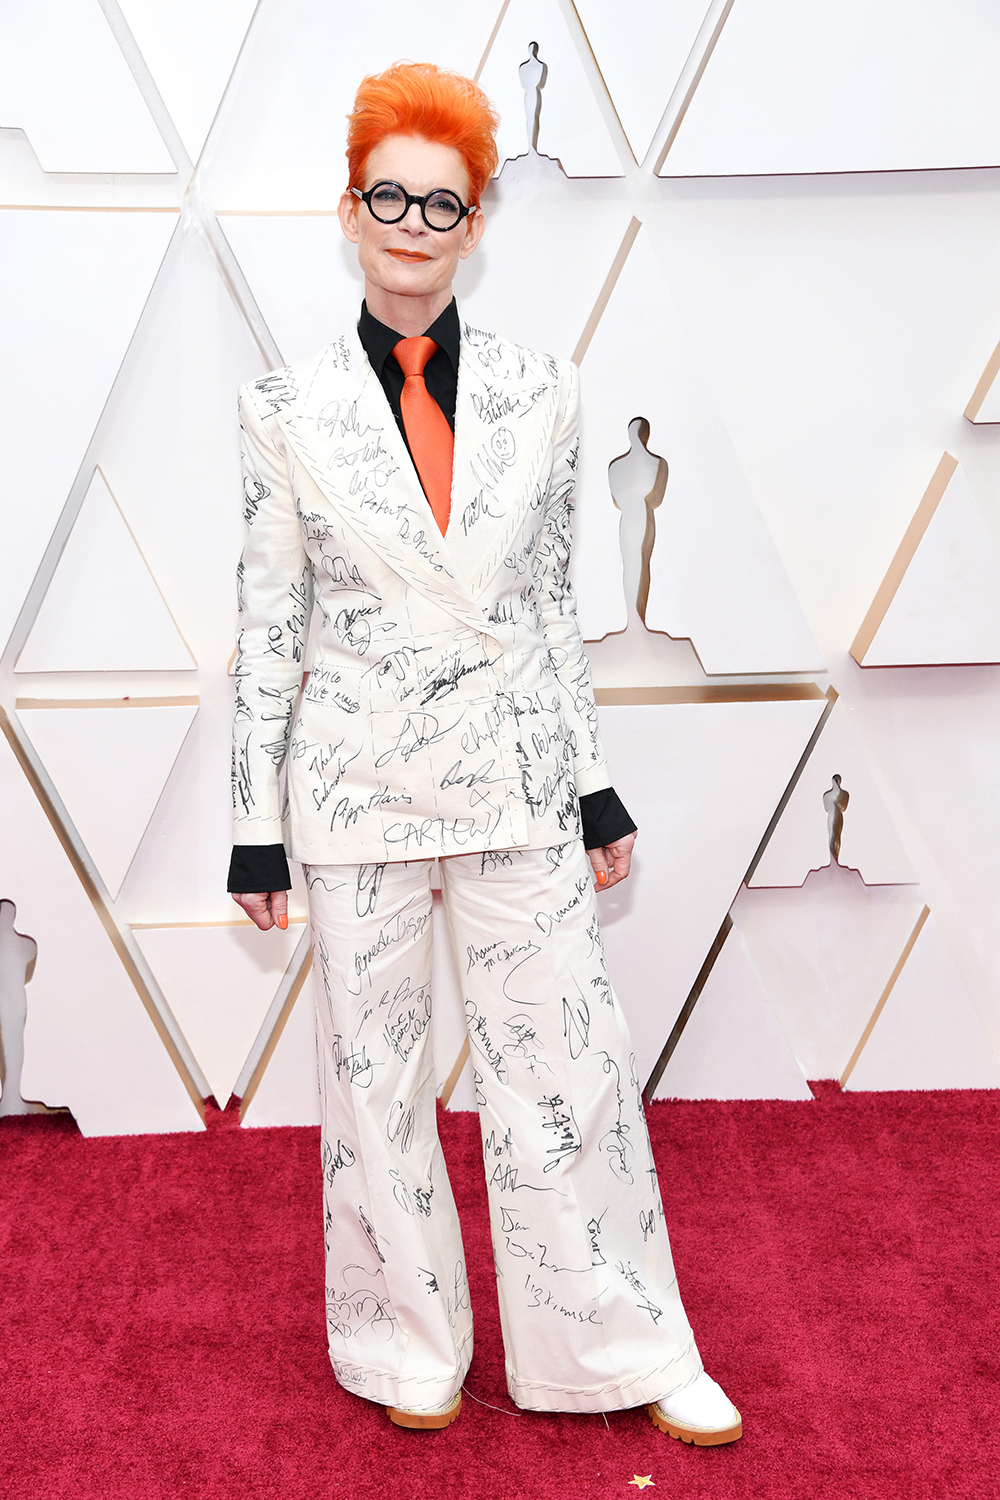 HOLLYWOOD, CALIFORNIA - FEBRUARY 09: Costume designer Sandy Powell attends the 92nd Annual Academy Awards at Hollywood and Highland on February 09, 2020 in Hollywood, California. (Photo by Kevin Mazur/Getty Images)